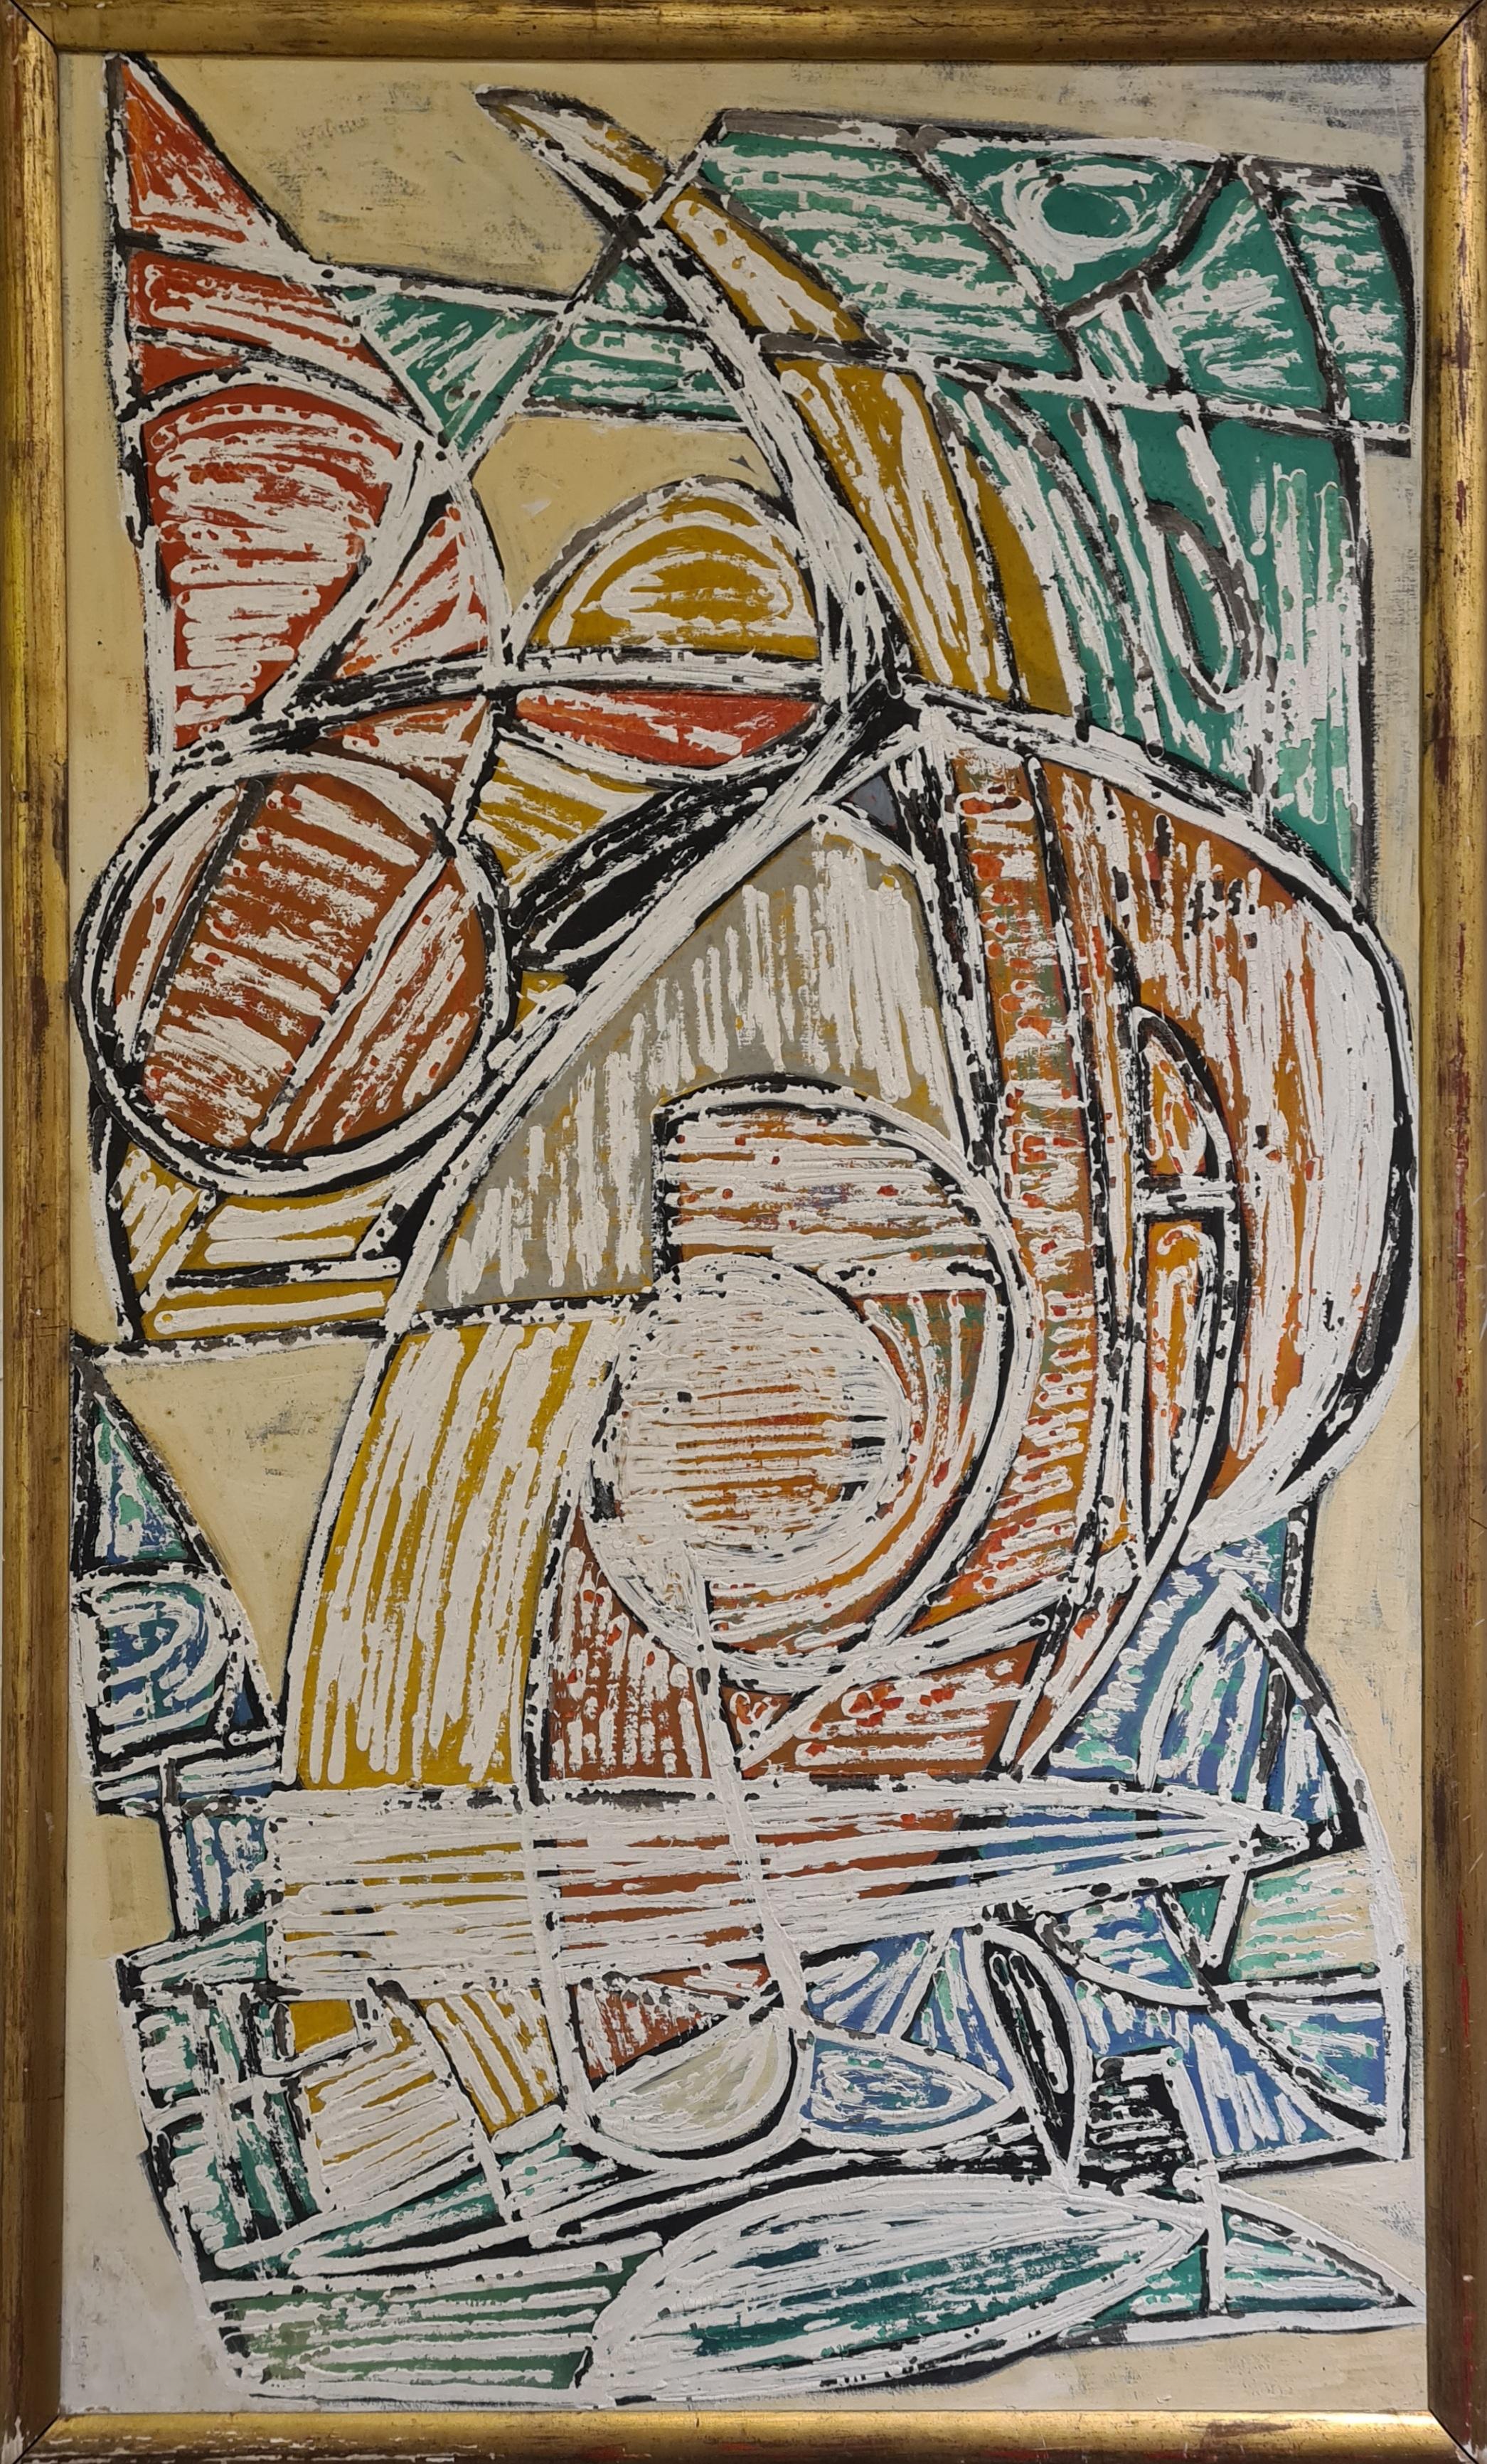 Unknown Abstract Painting - Large Aboriginal-Inspired Abstract Oil on Board.